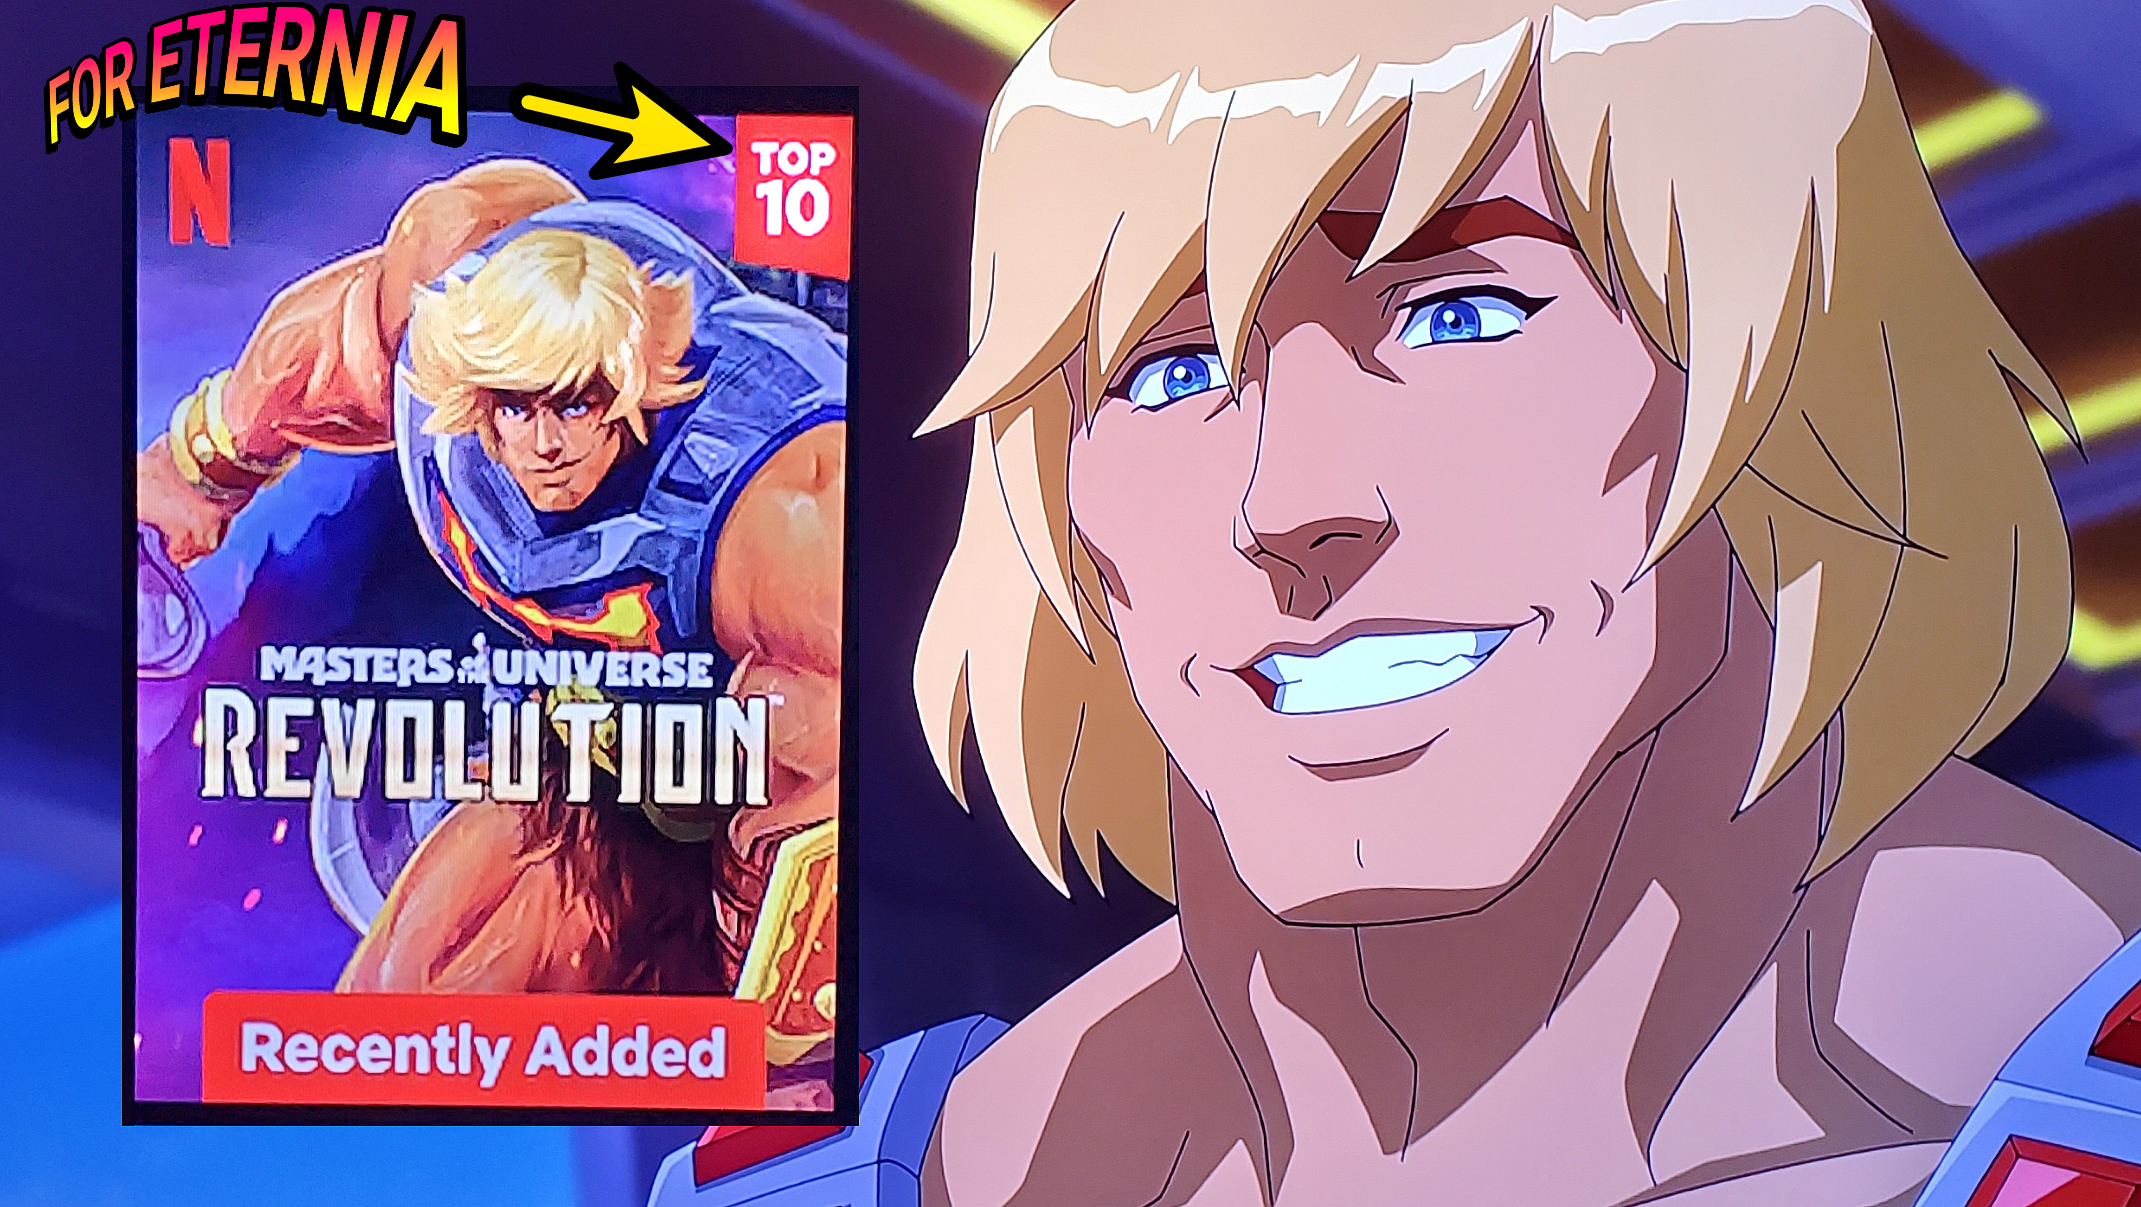 YES! “Masters of the Universe: Revolution” makes Netflix Top 10 TV Show list in the U.S. first day of release!